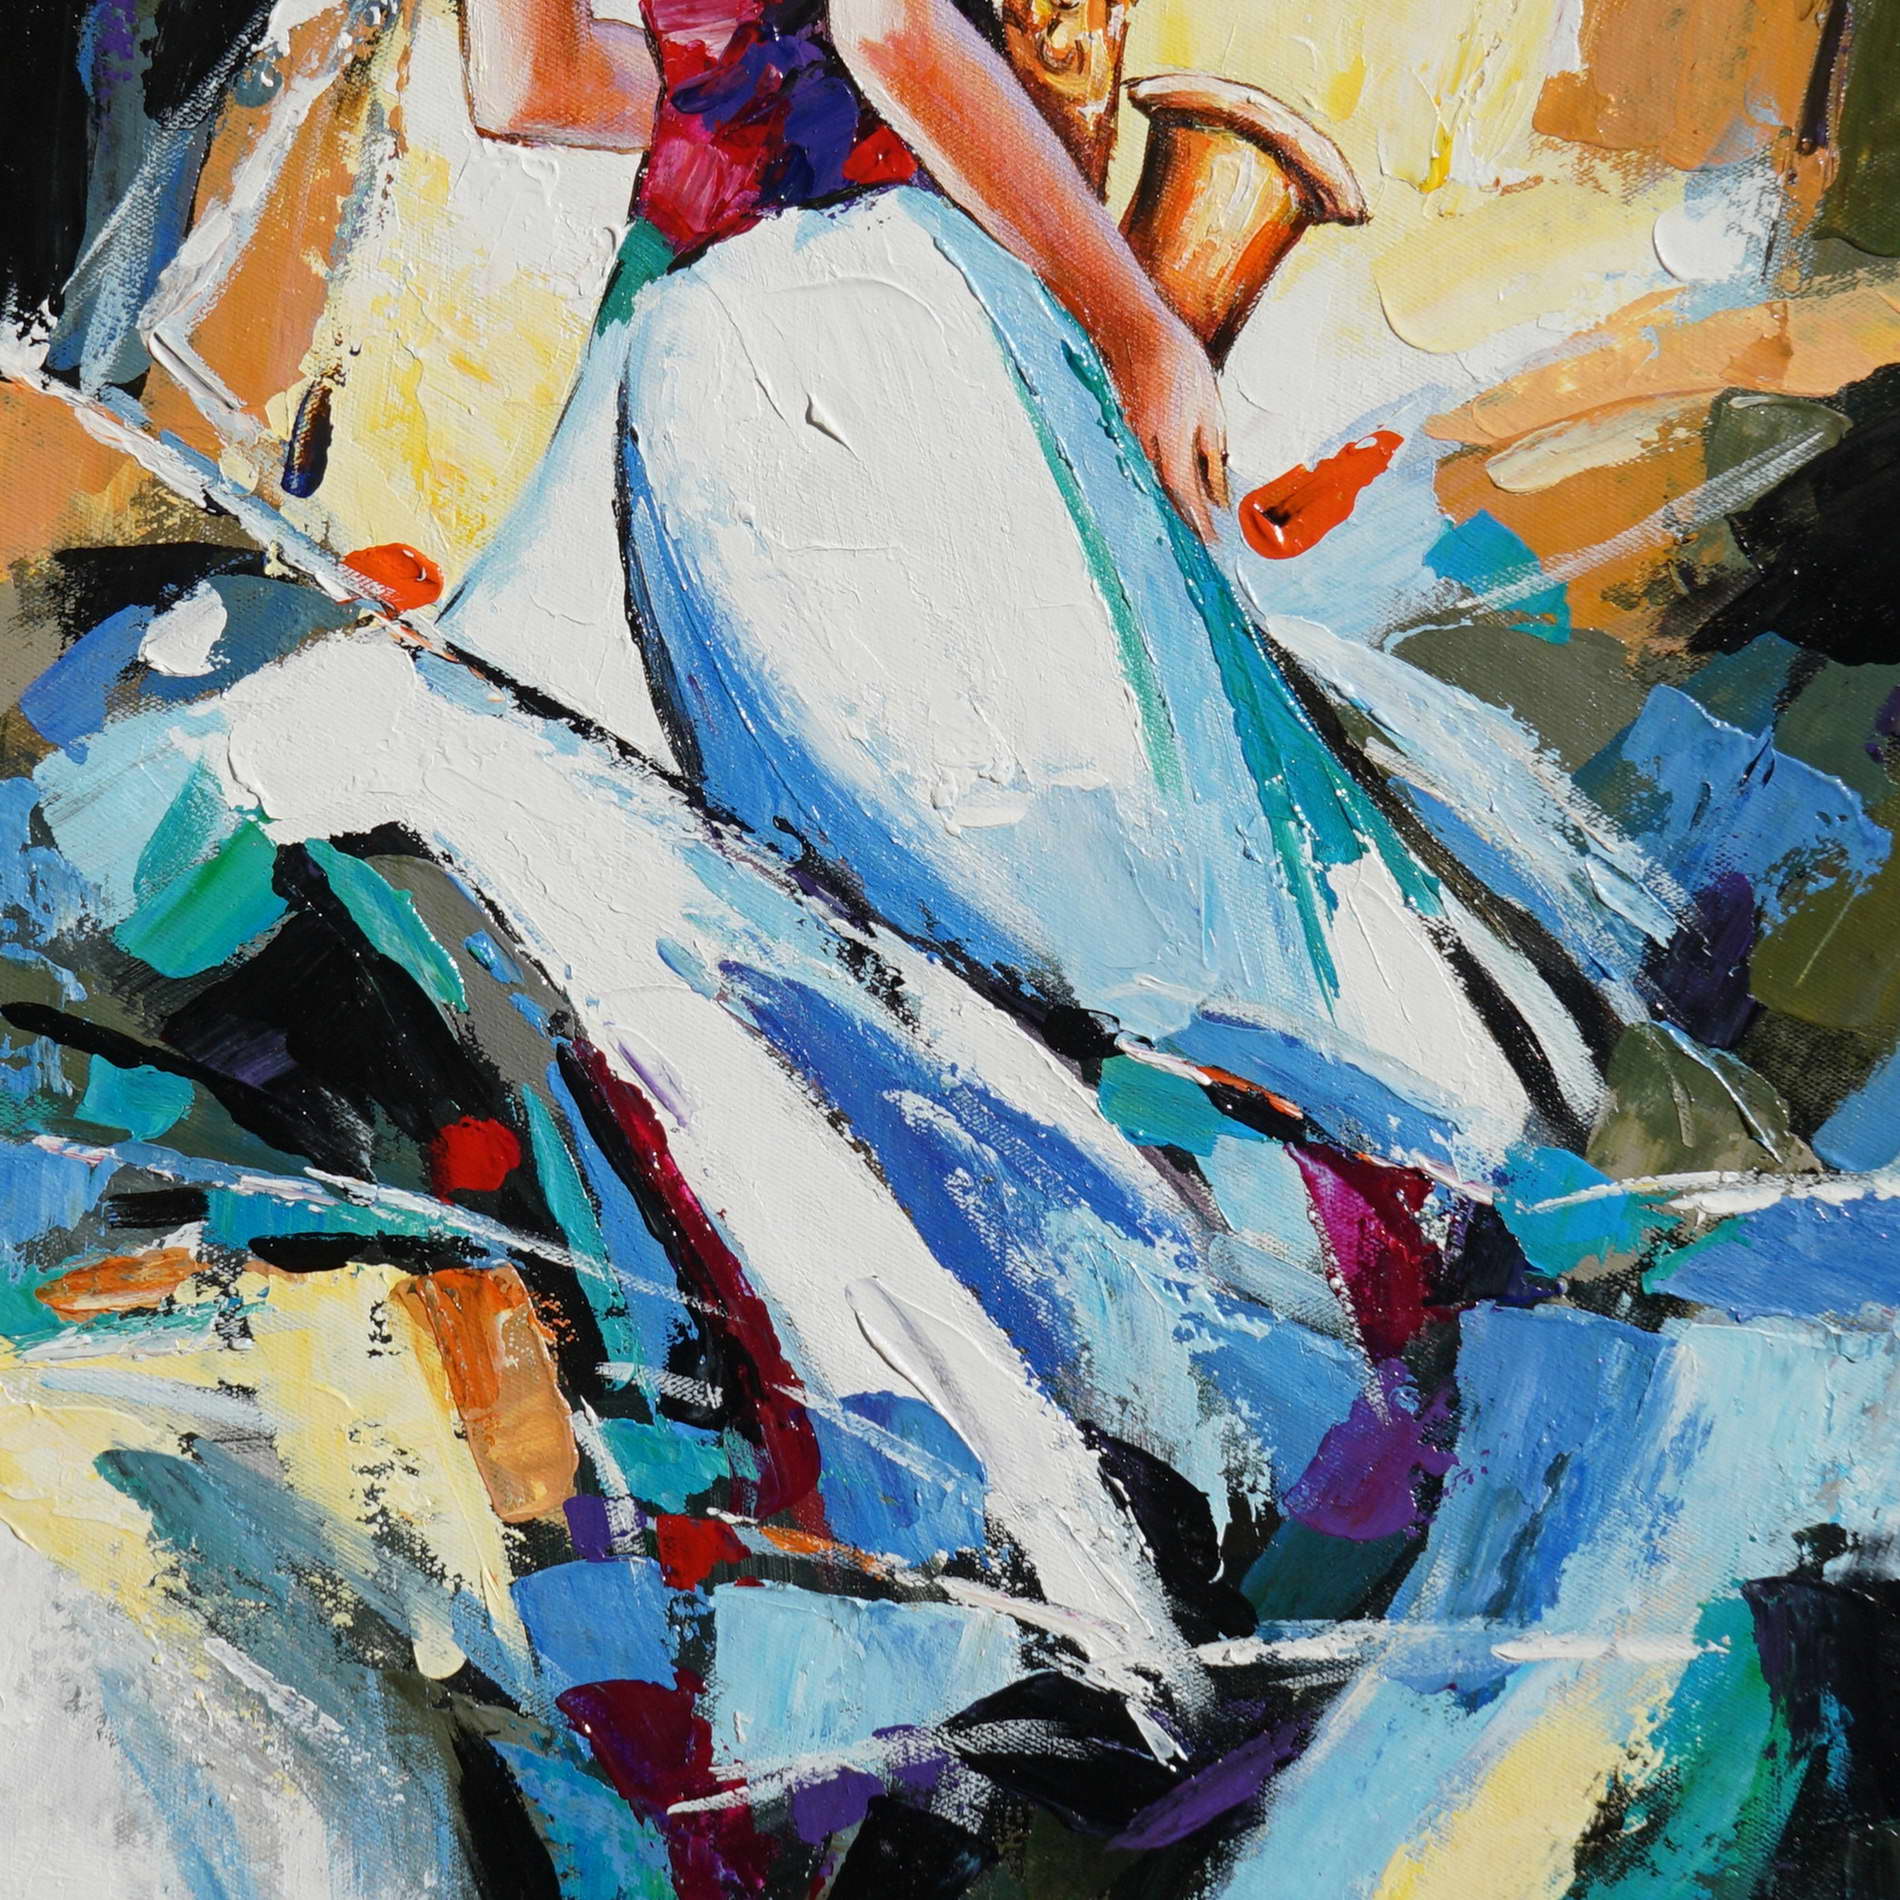 Hand painted Abstract Saxophonist in white dress 50x70cm